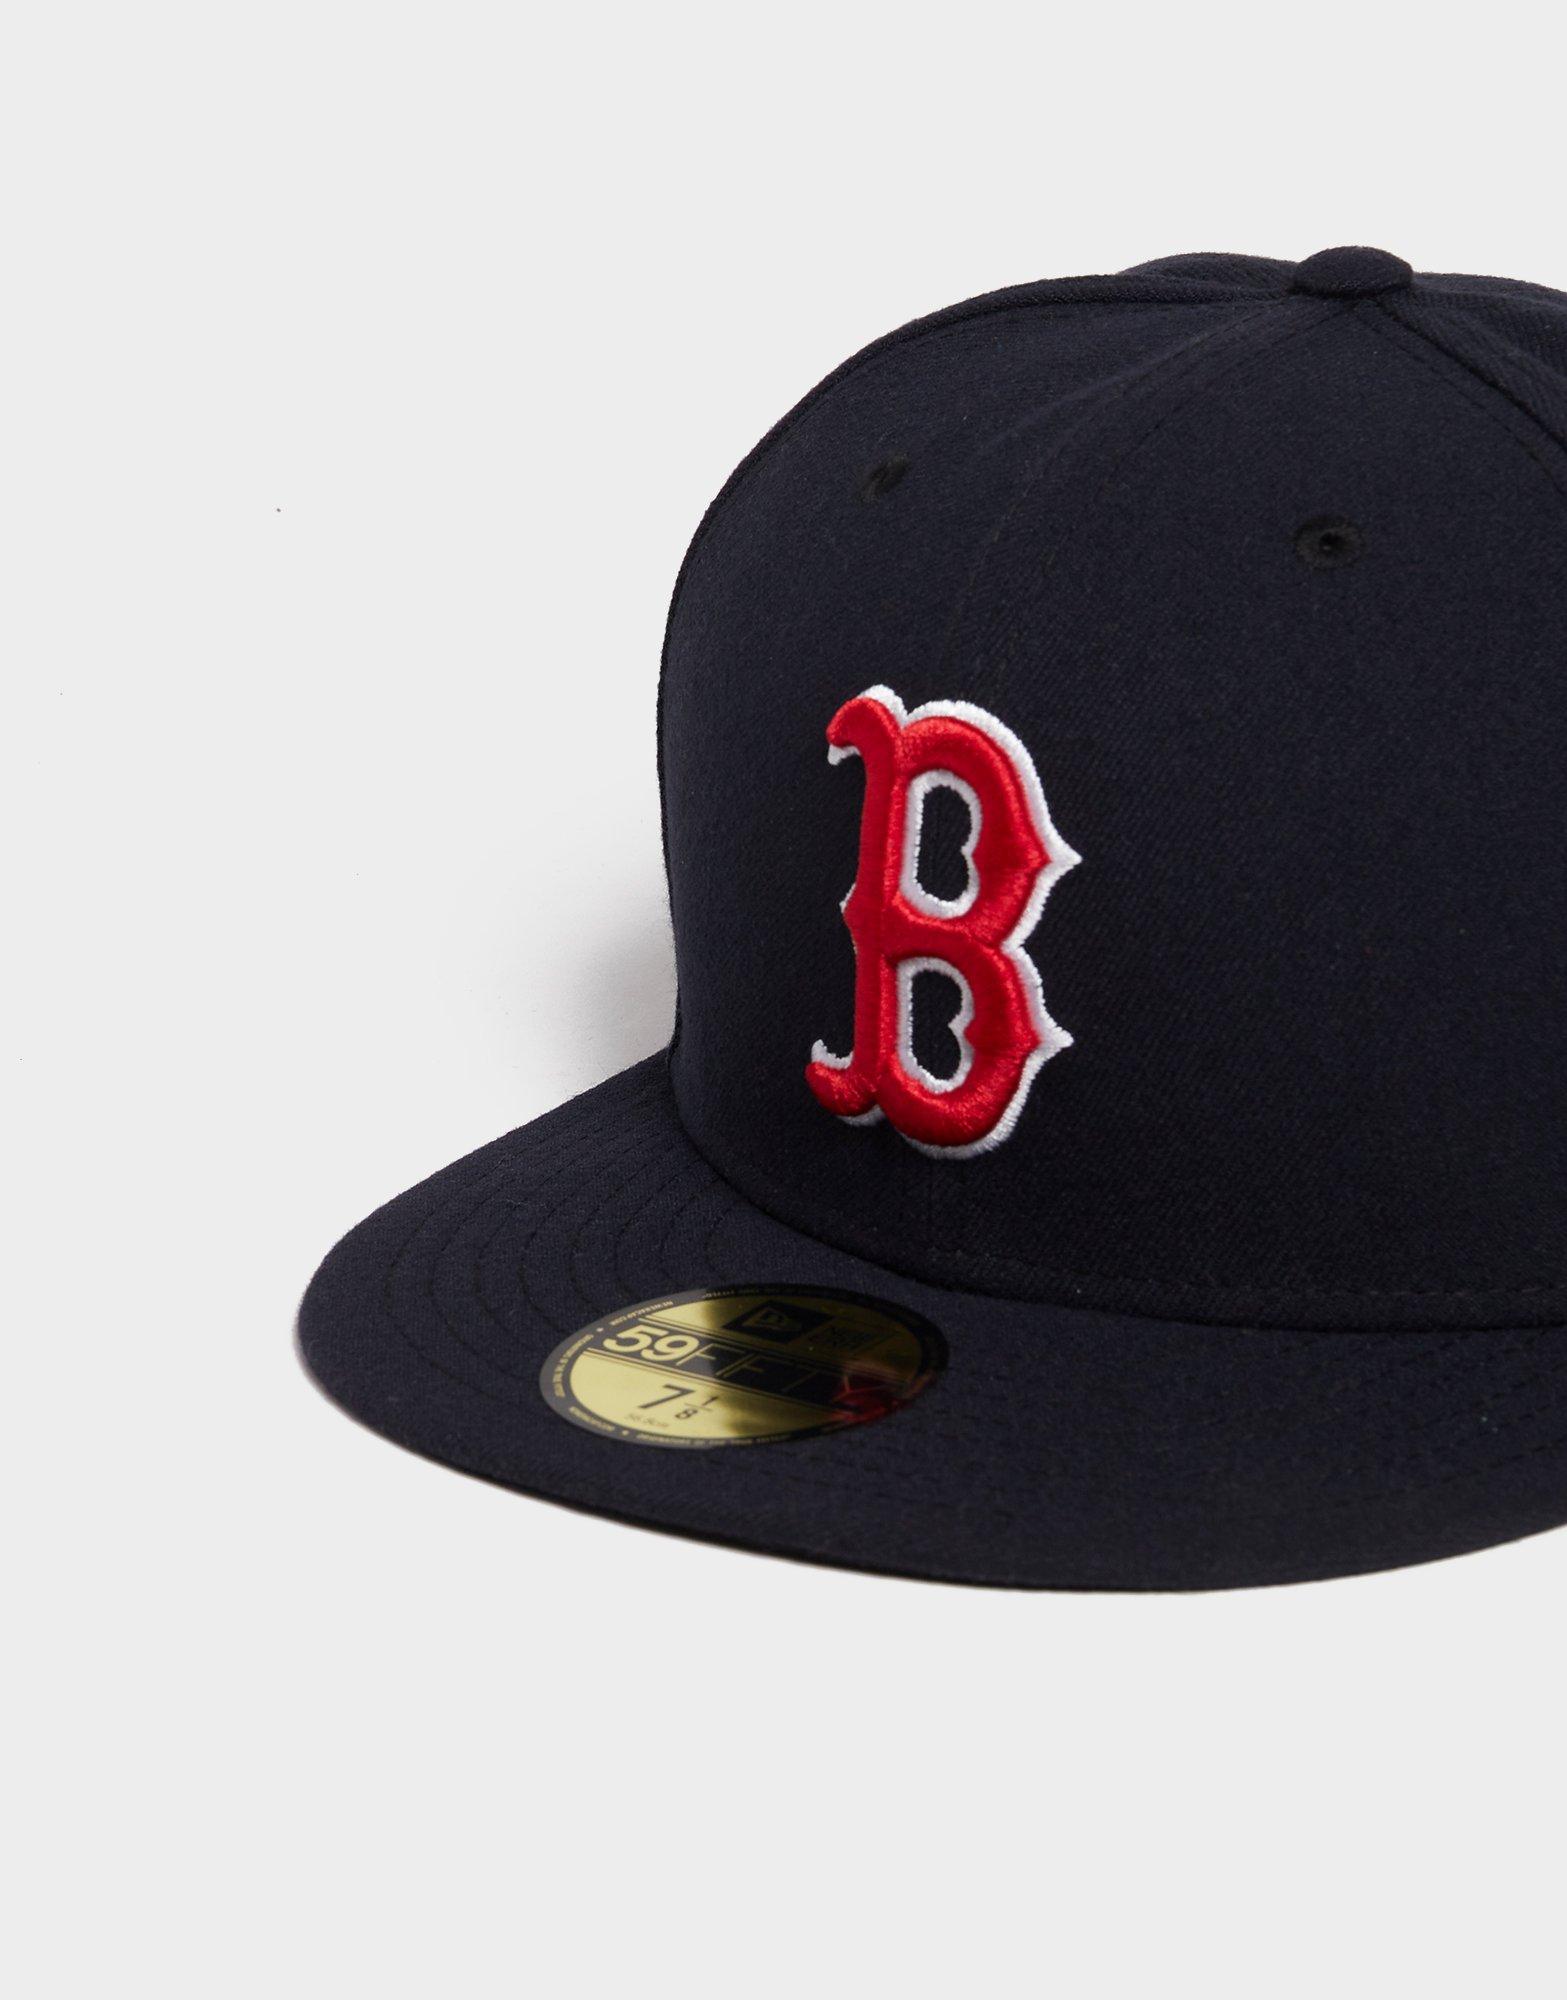 59Fifty MLB Repreve Red Sox Cap by New Era - 42,95 €